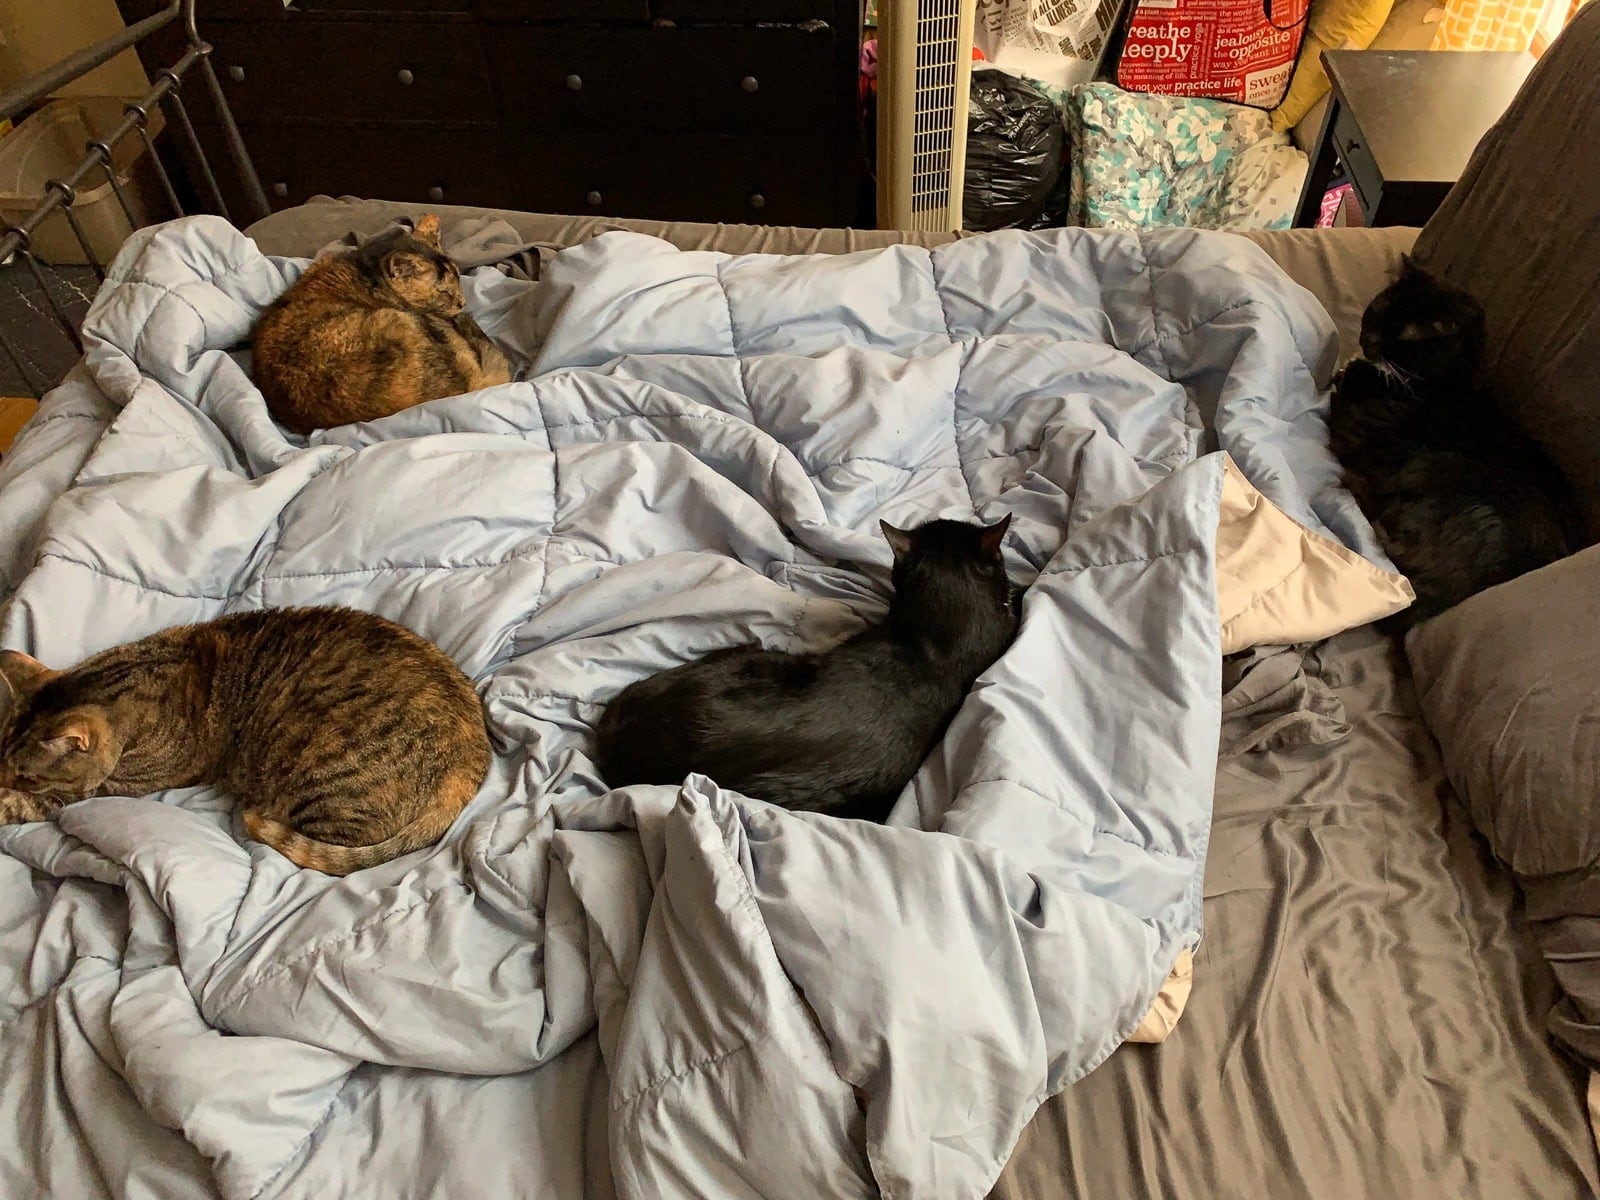 All four cats on the bed